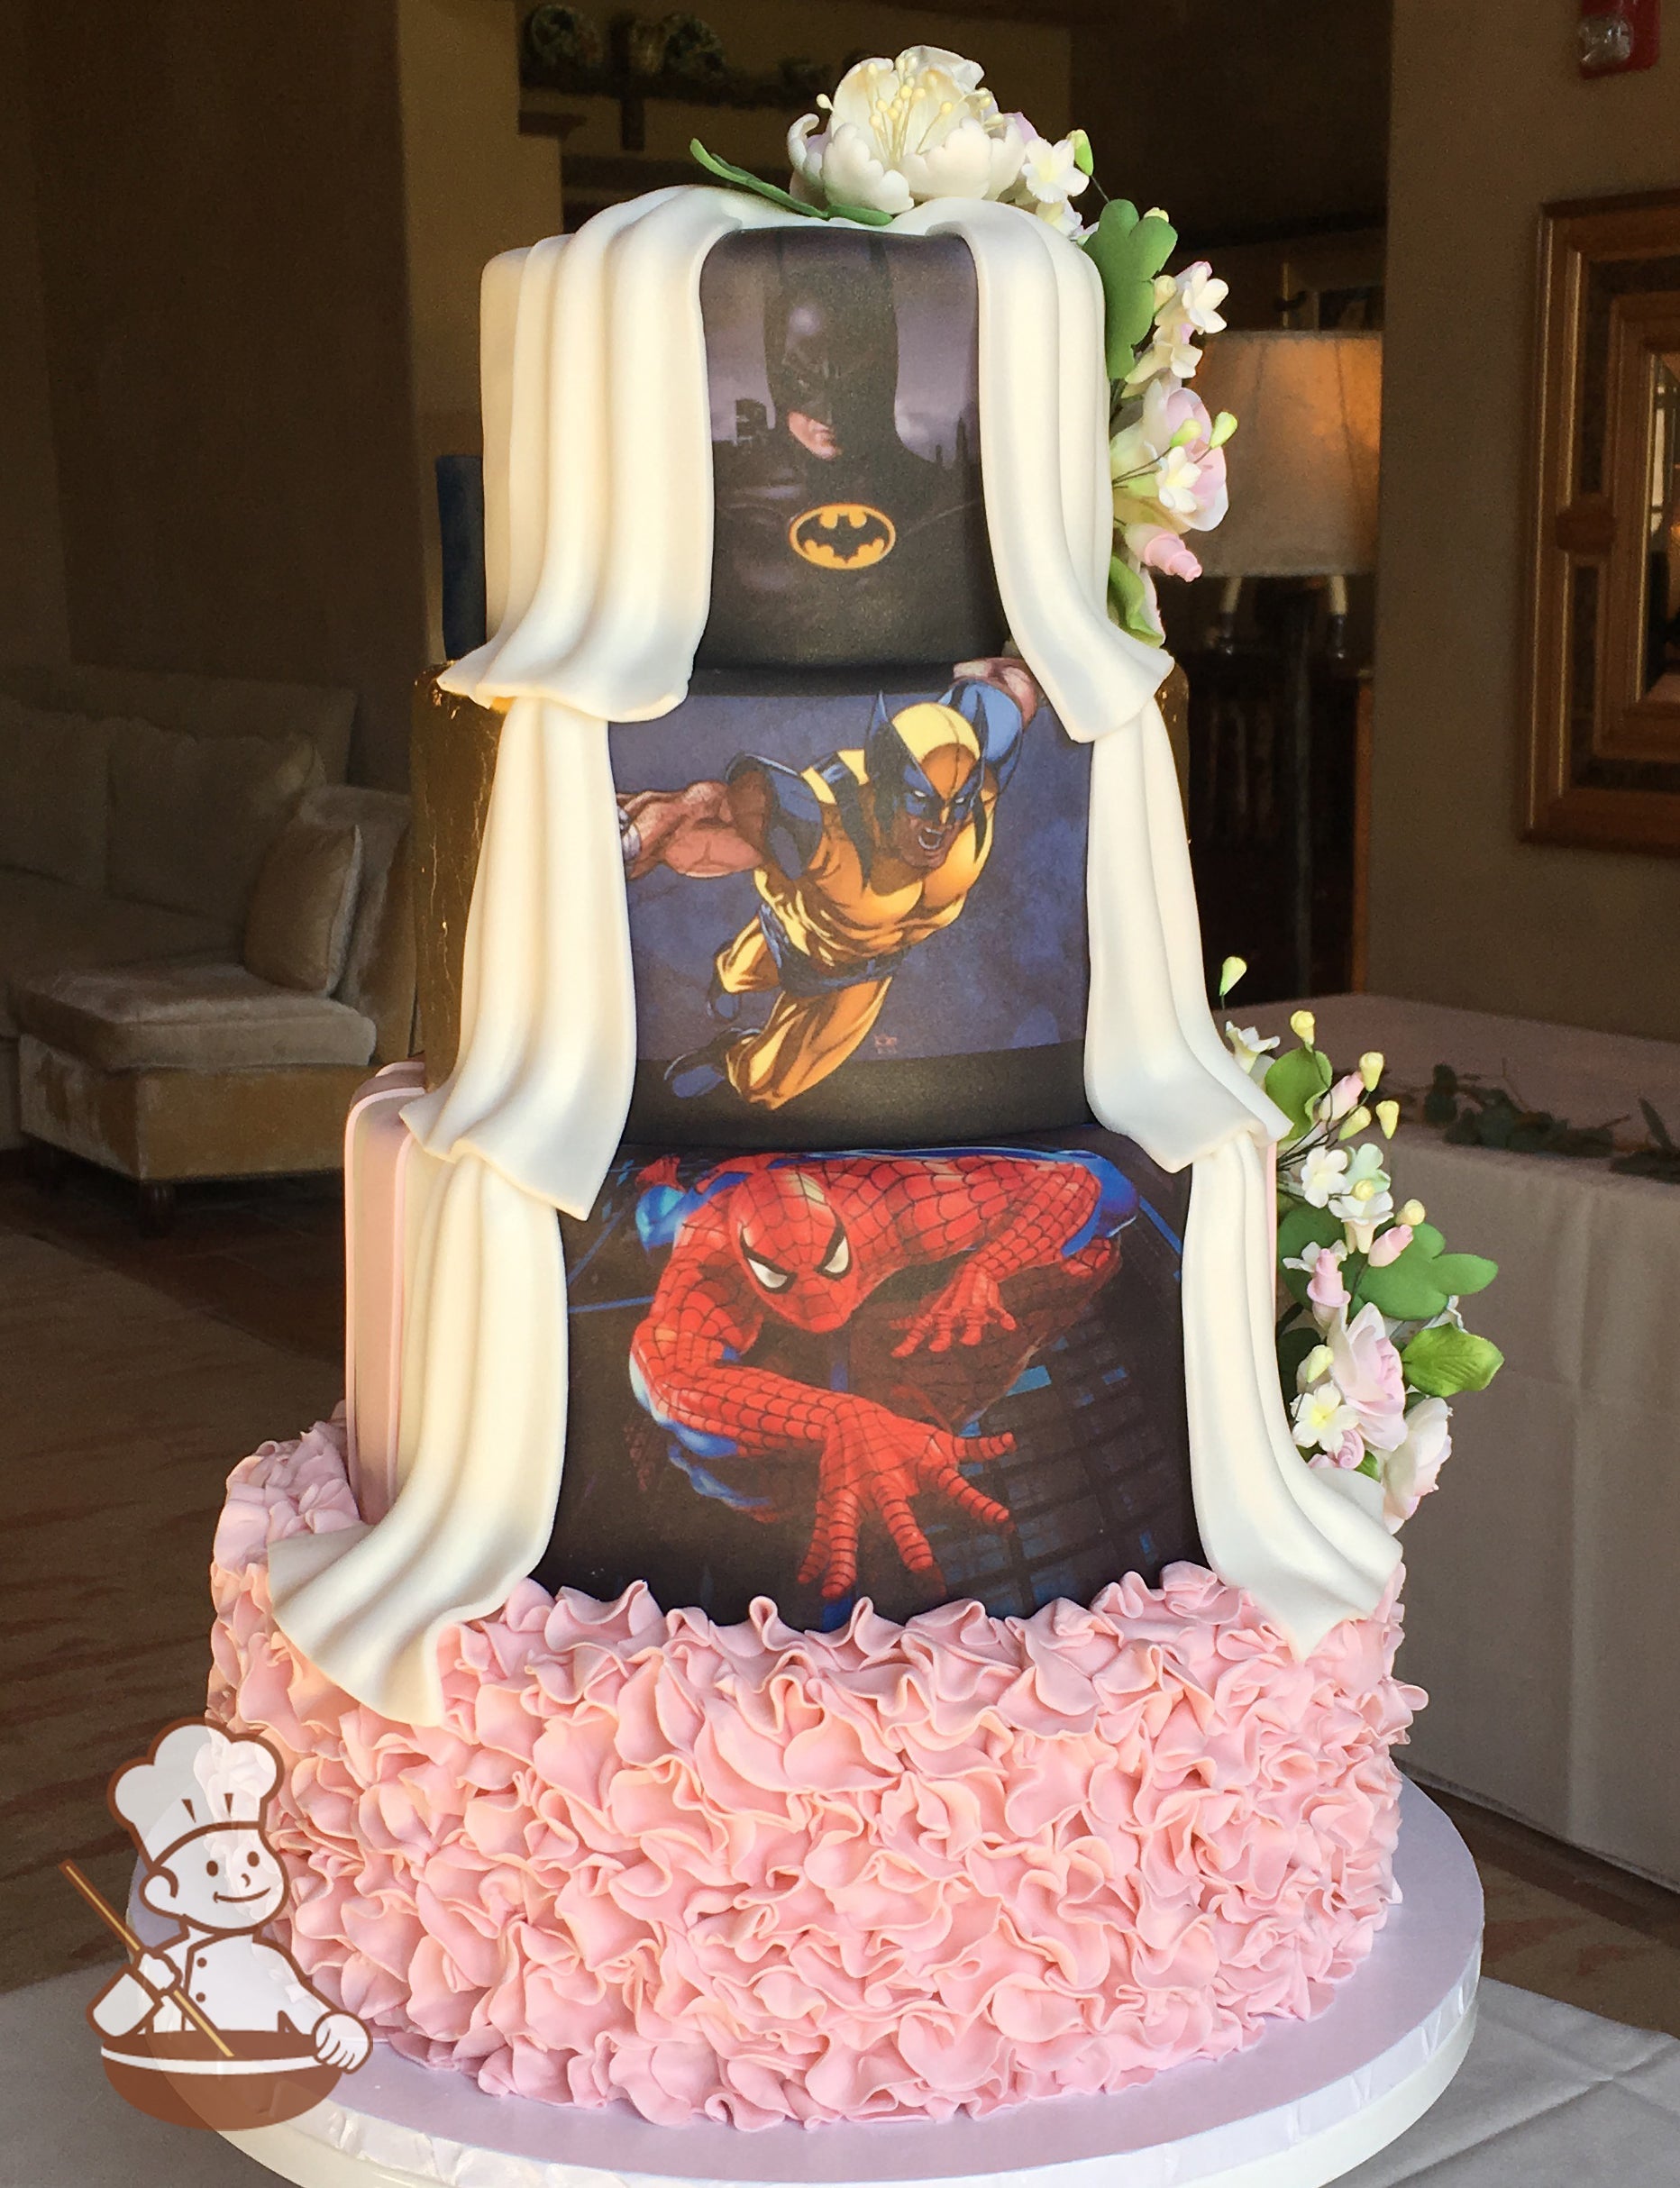 His side cake decoated with images of Batman, Wolverine, and Spiderman; separated from Her side with white fondant drapes. 